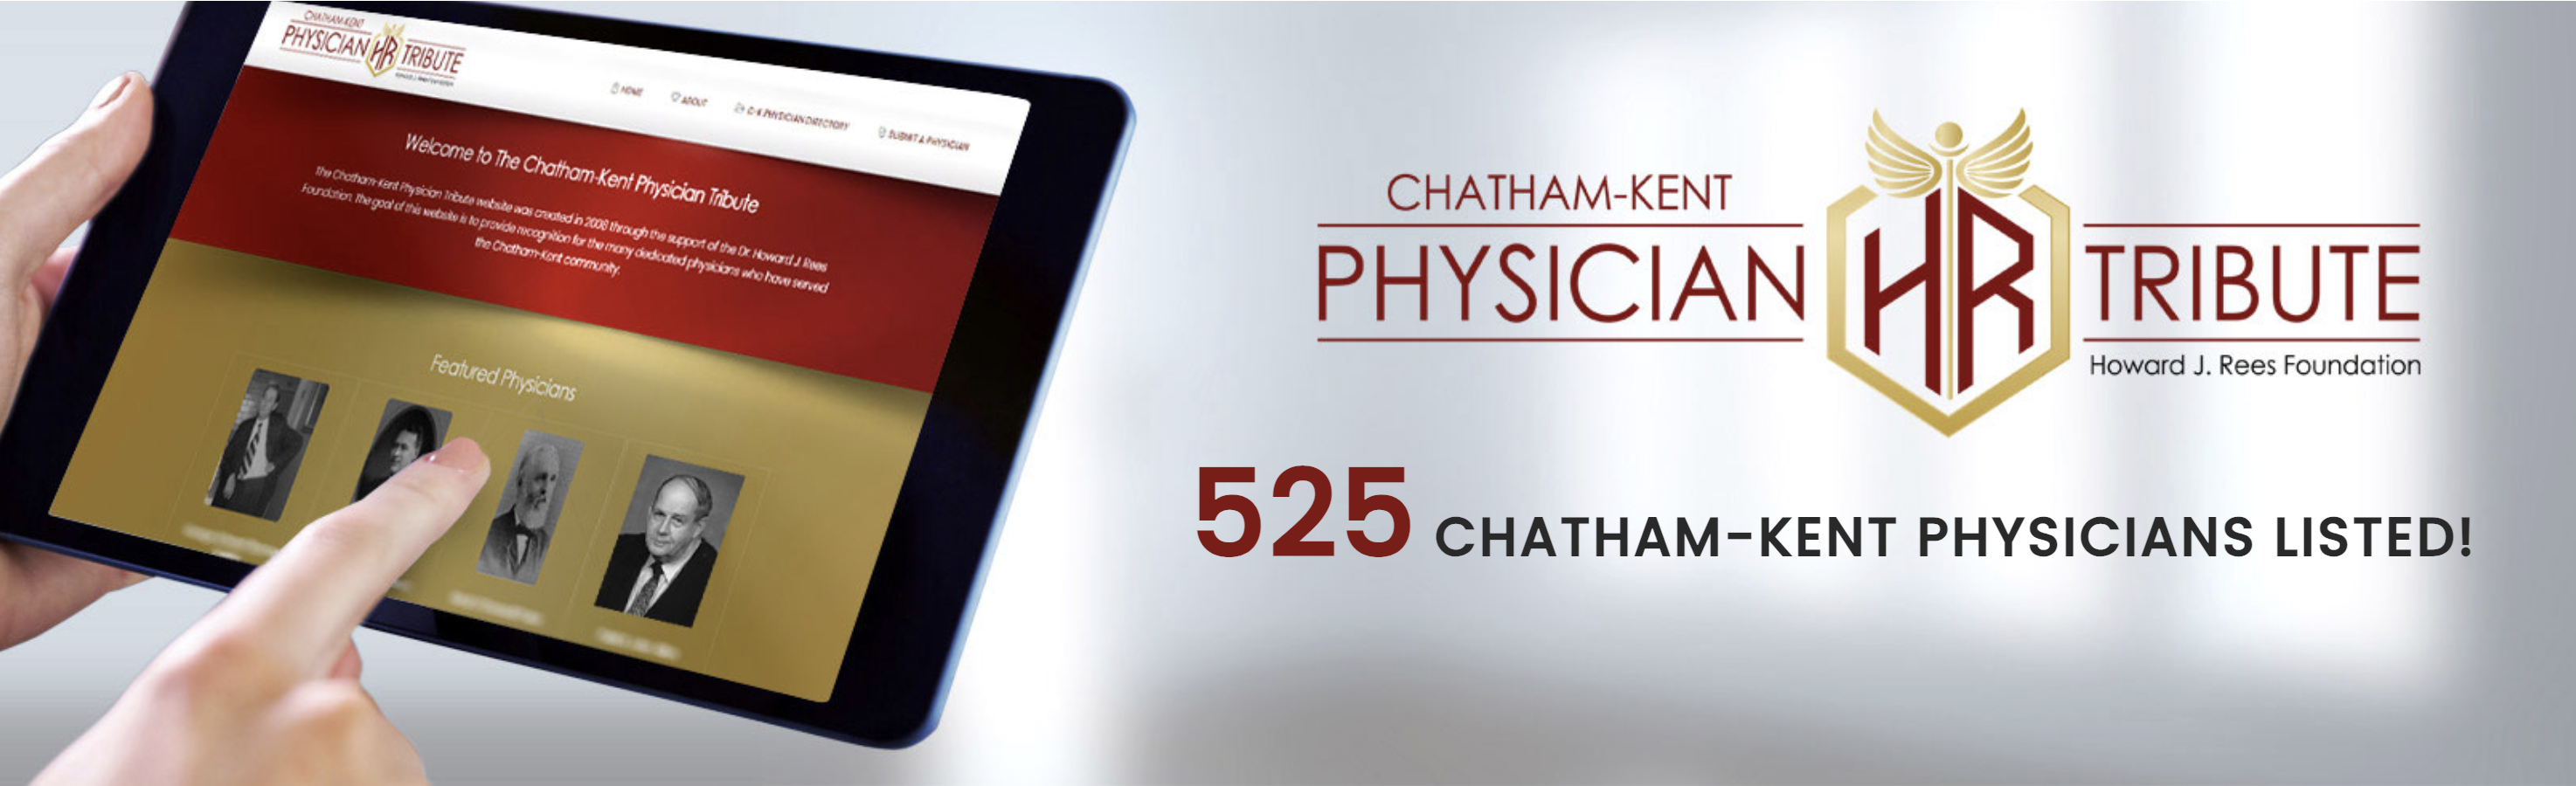 Featured image for “Chatham-Kent Physician Tribute”